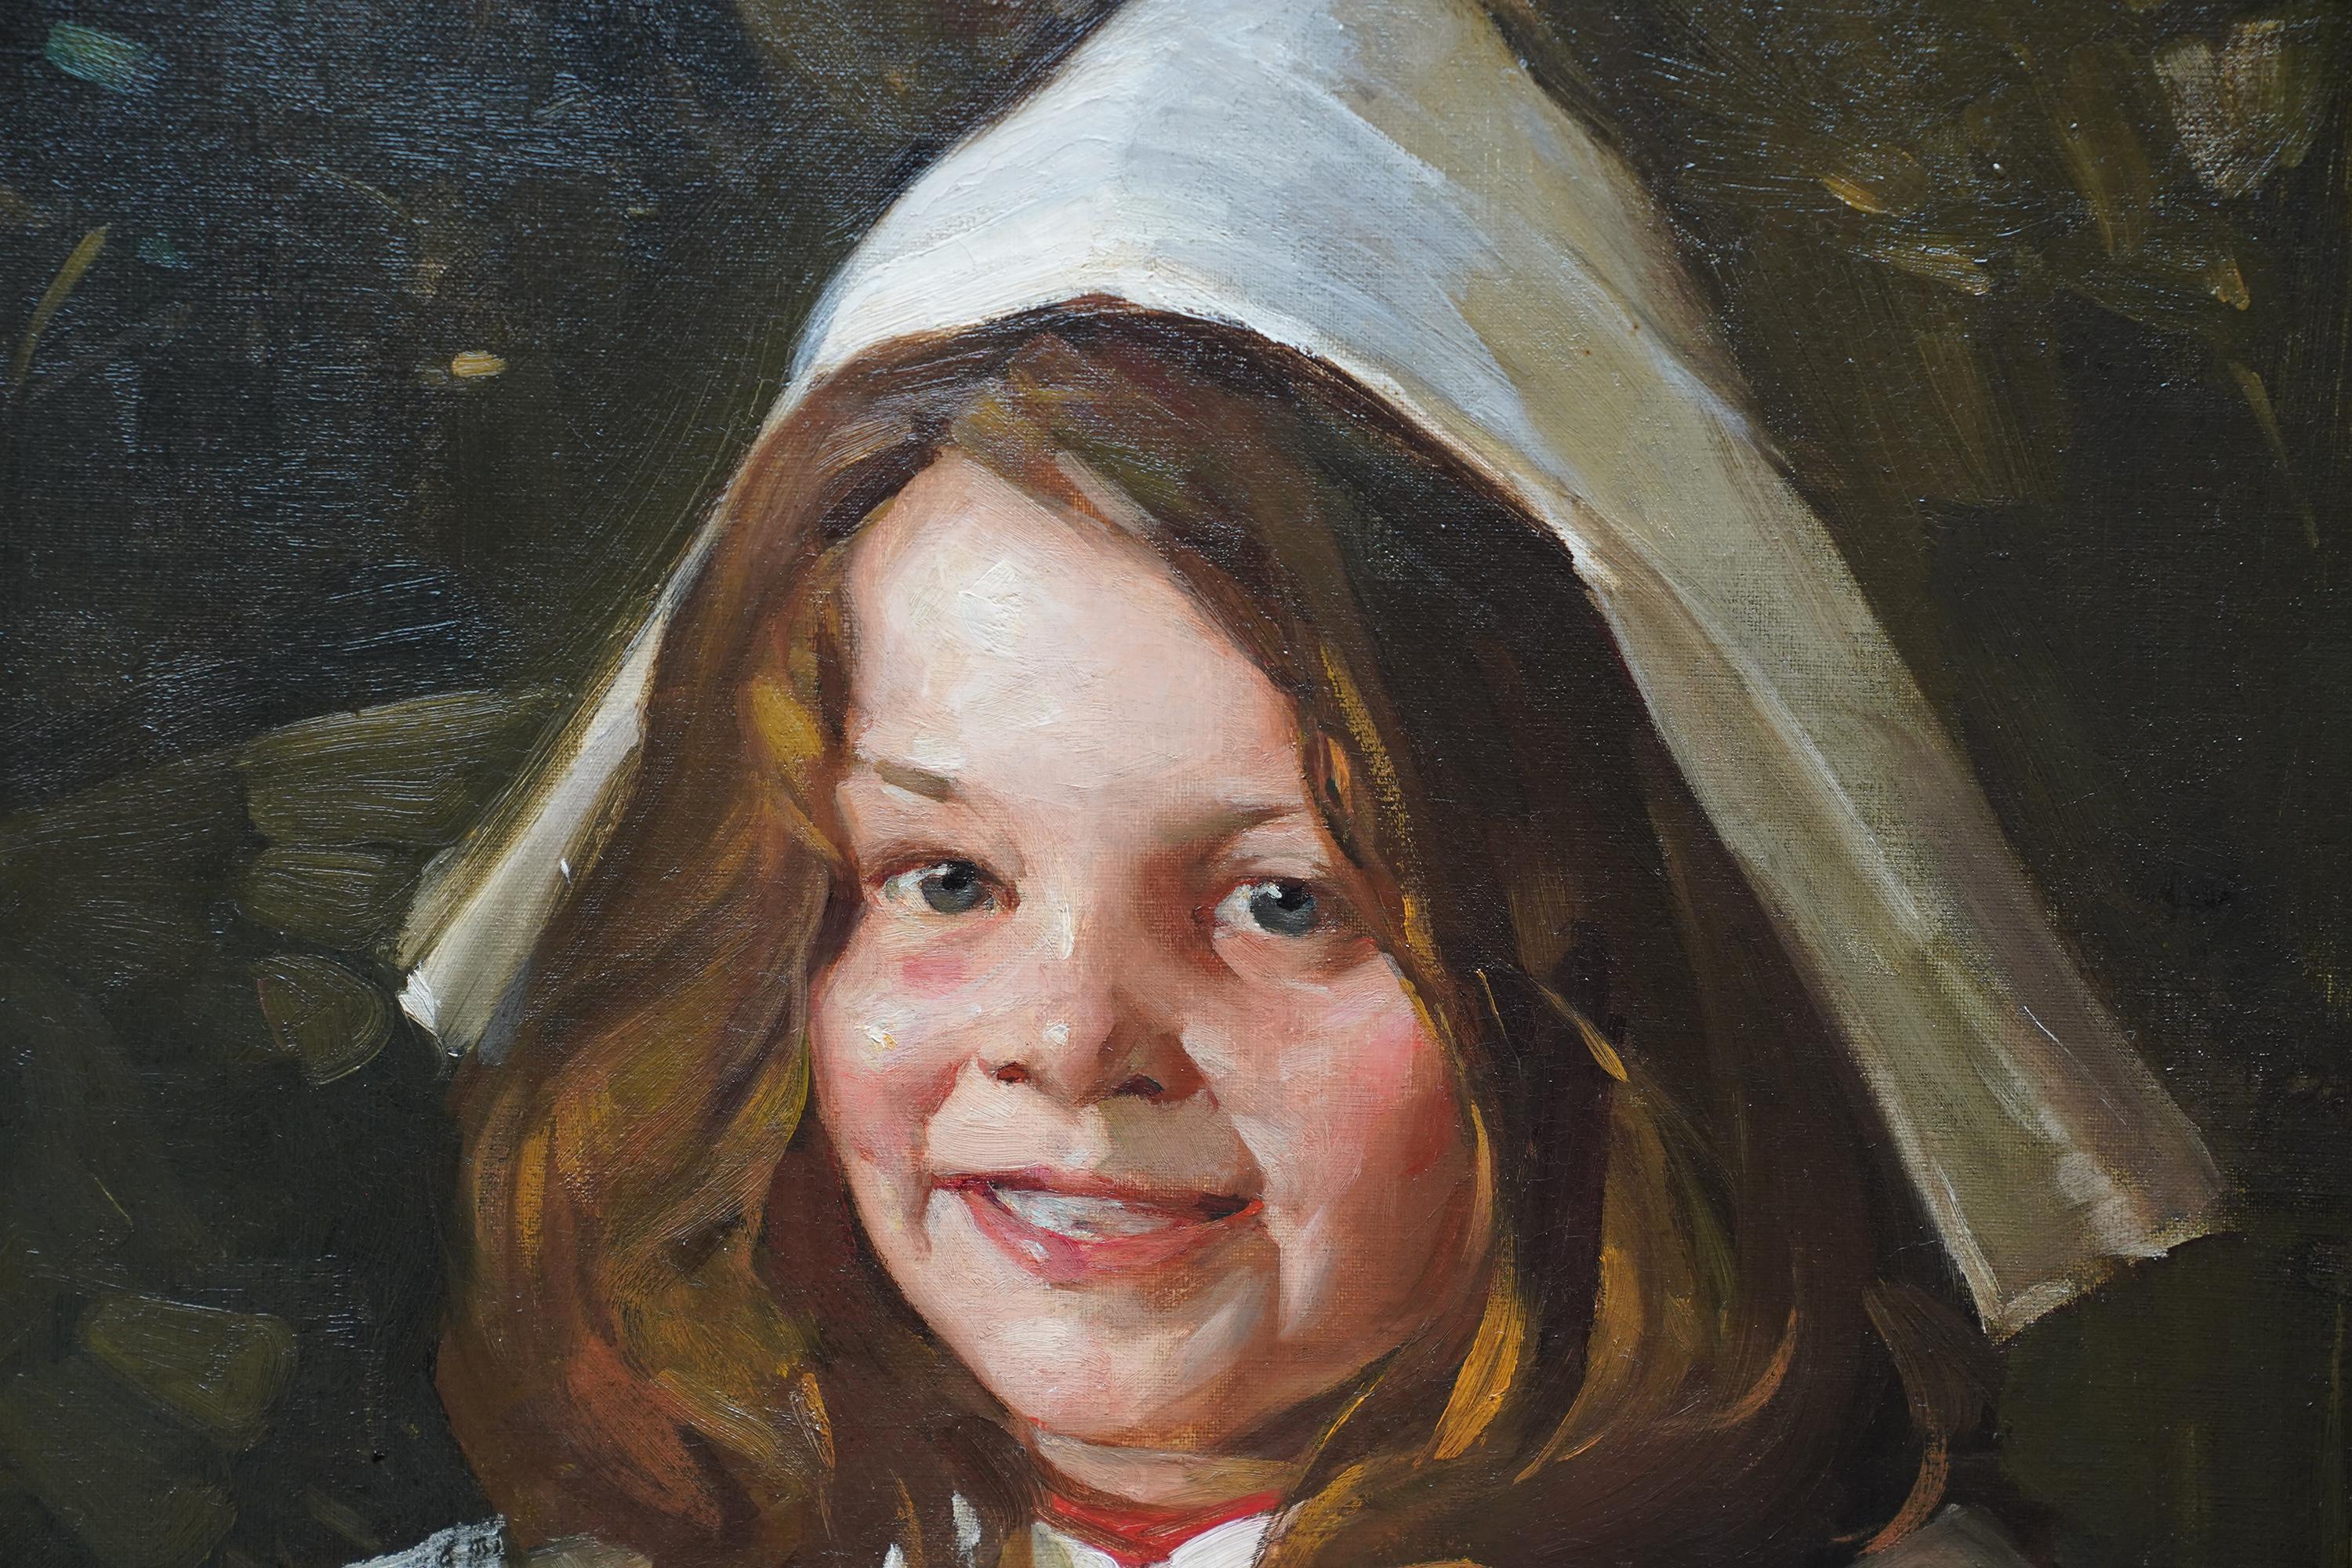 This cheery Scottish portrait oil painting is by noted artist David Alison. Painted in 1906 it is a half length portrait of a smiling girl in a red dress and white collar and white party hat against a dark patterned background. Her dark curling hair